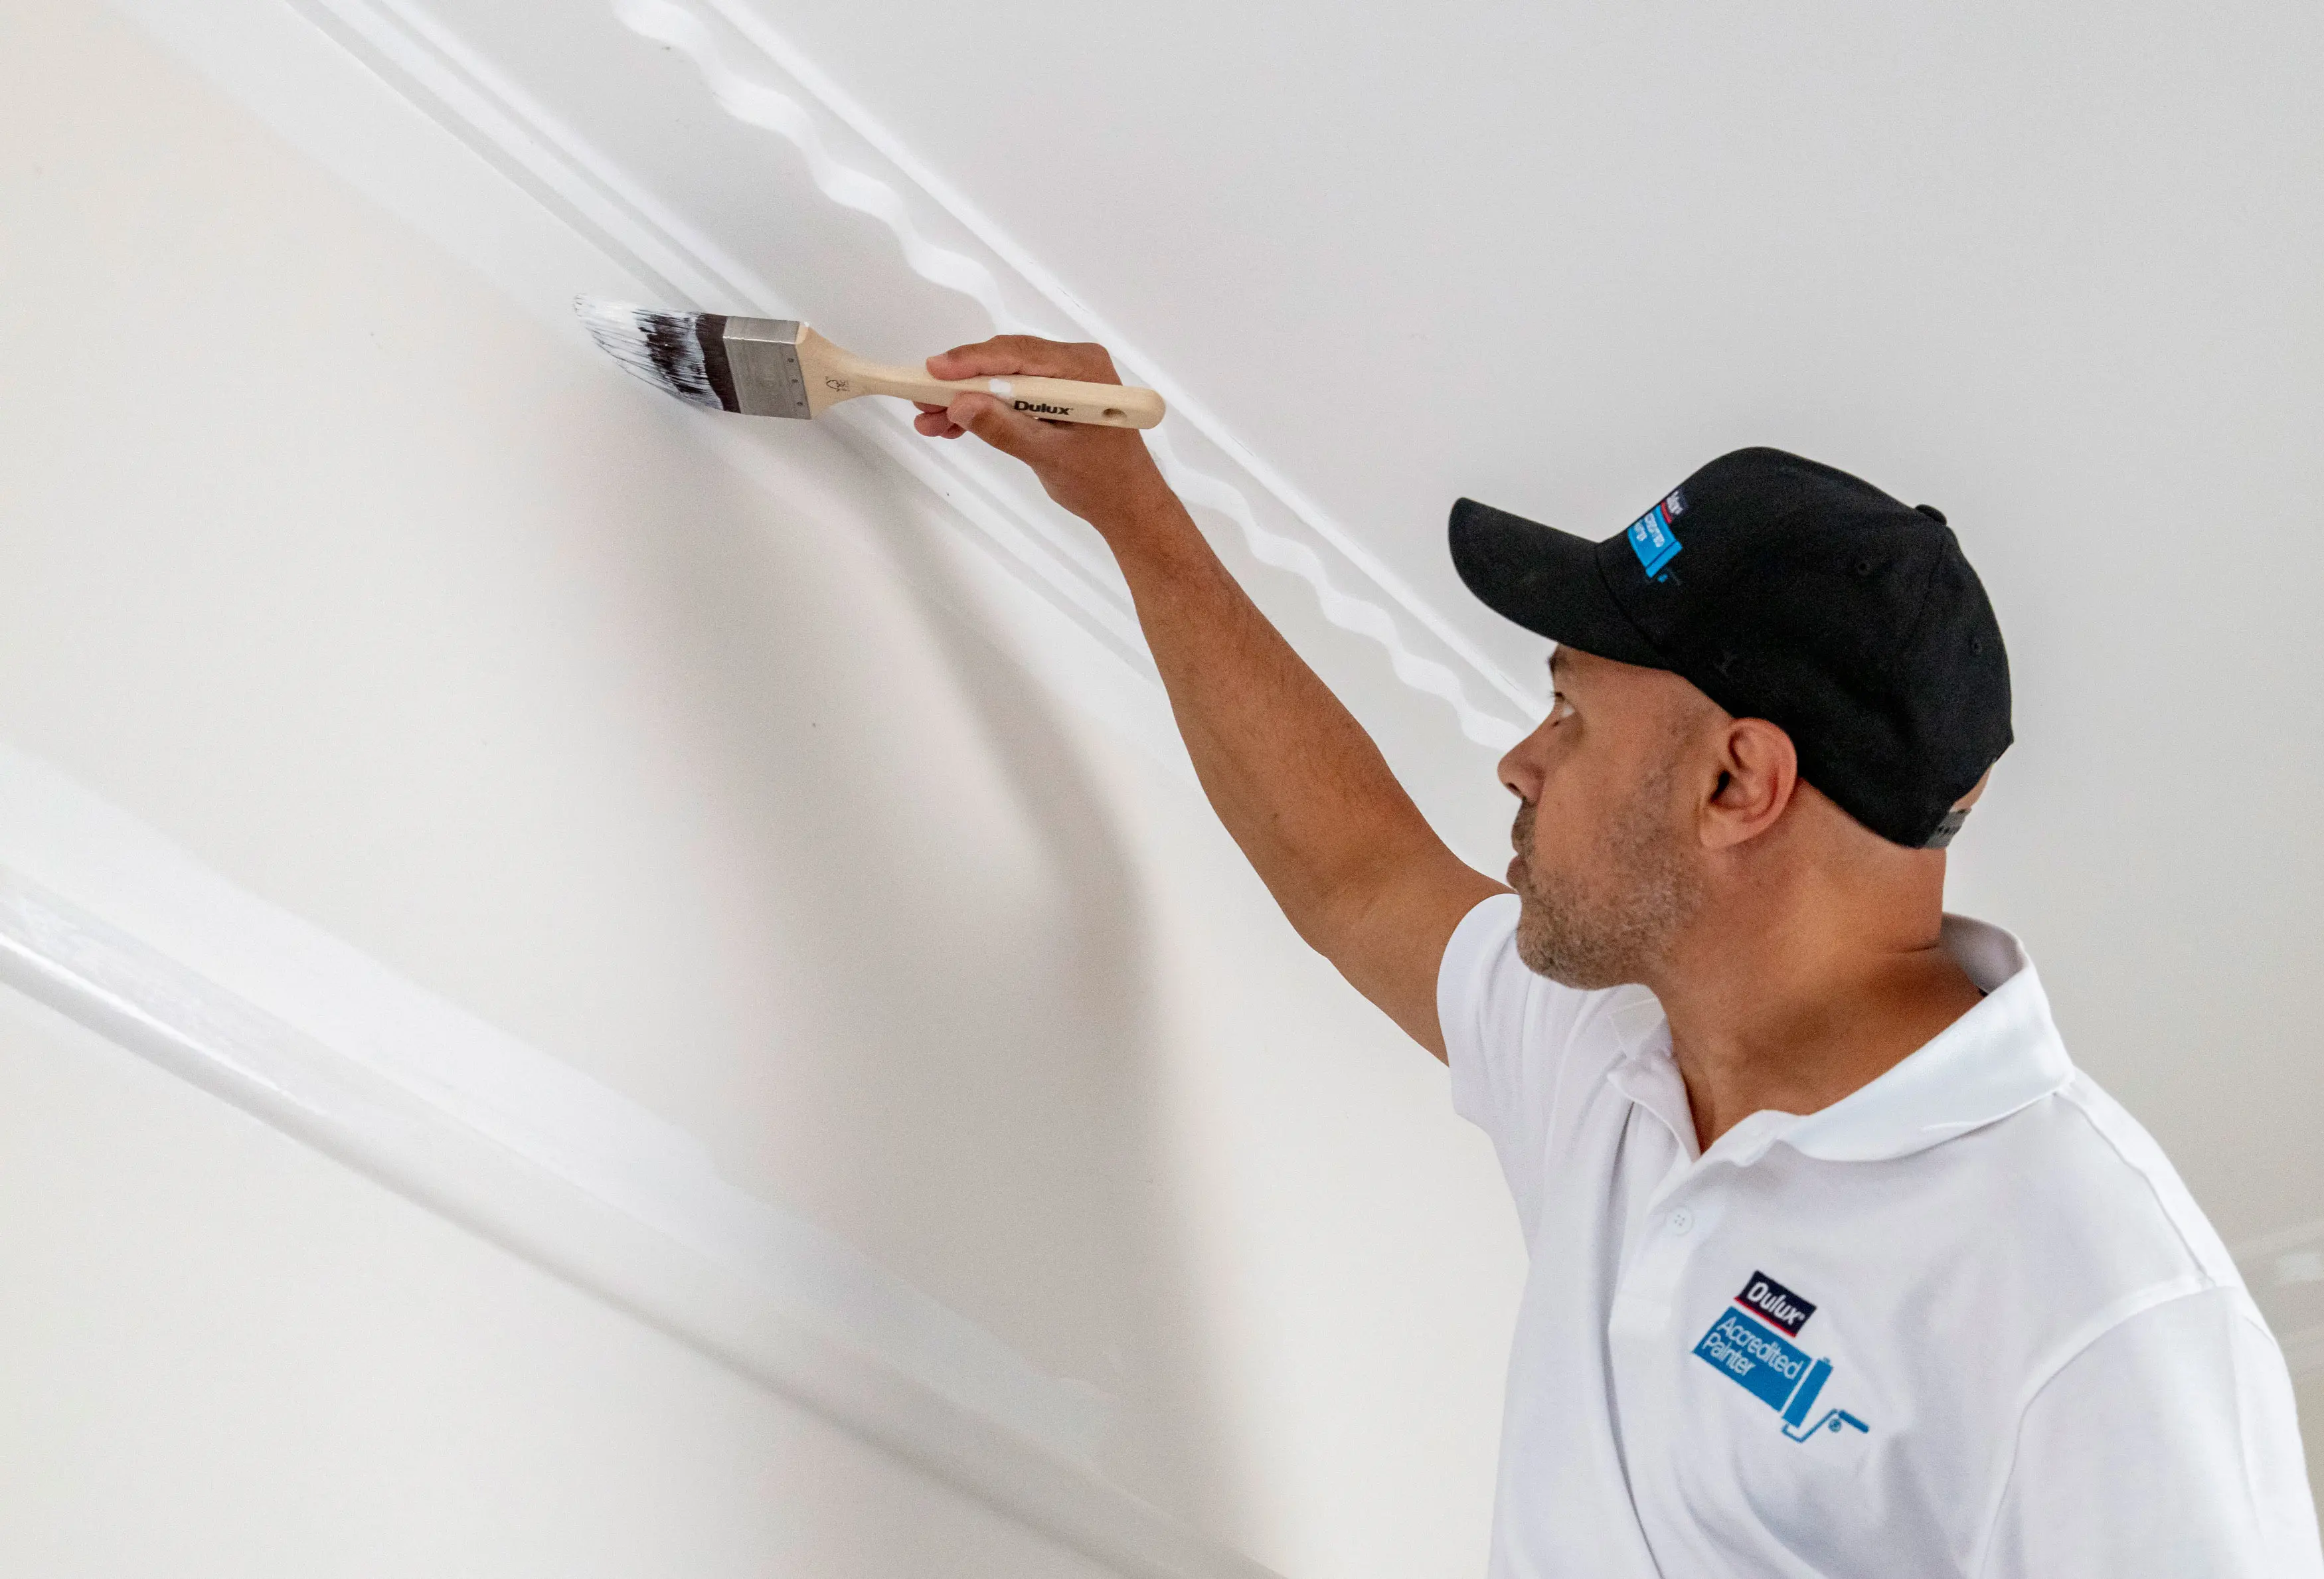 Dulux painter wearing cap painting white wall